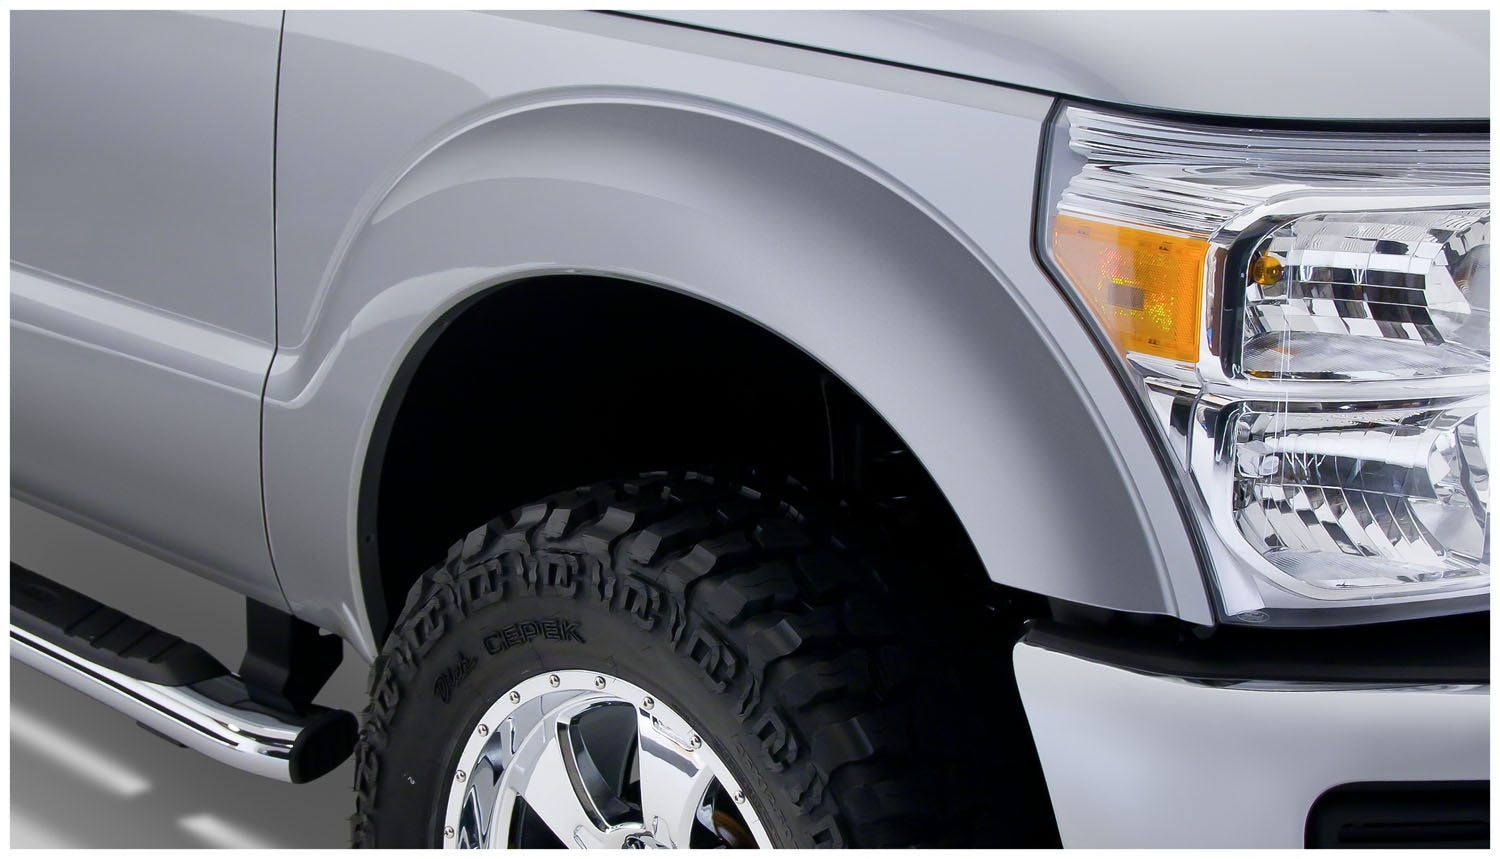 Bushwacker 20932-02 Black Extend-A-Fender Style Smooth Finish 4-Piece Fender Flare Set for 2011-2016 Ford F-250 & F-350 Super Duty (Excludes Dually)